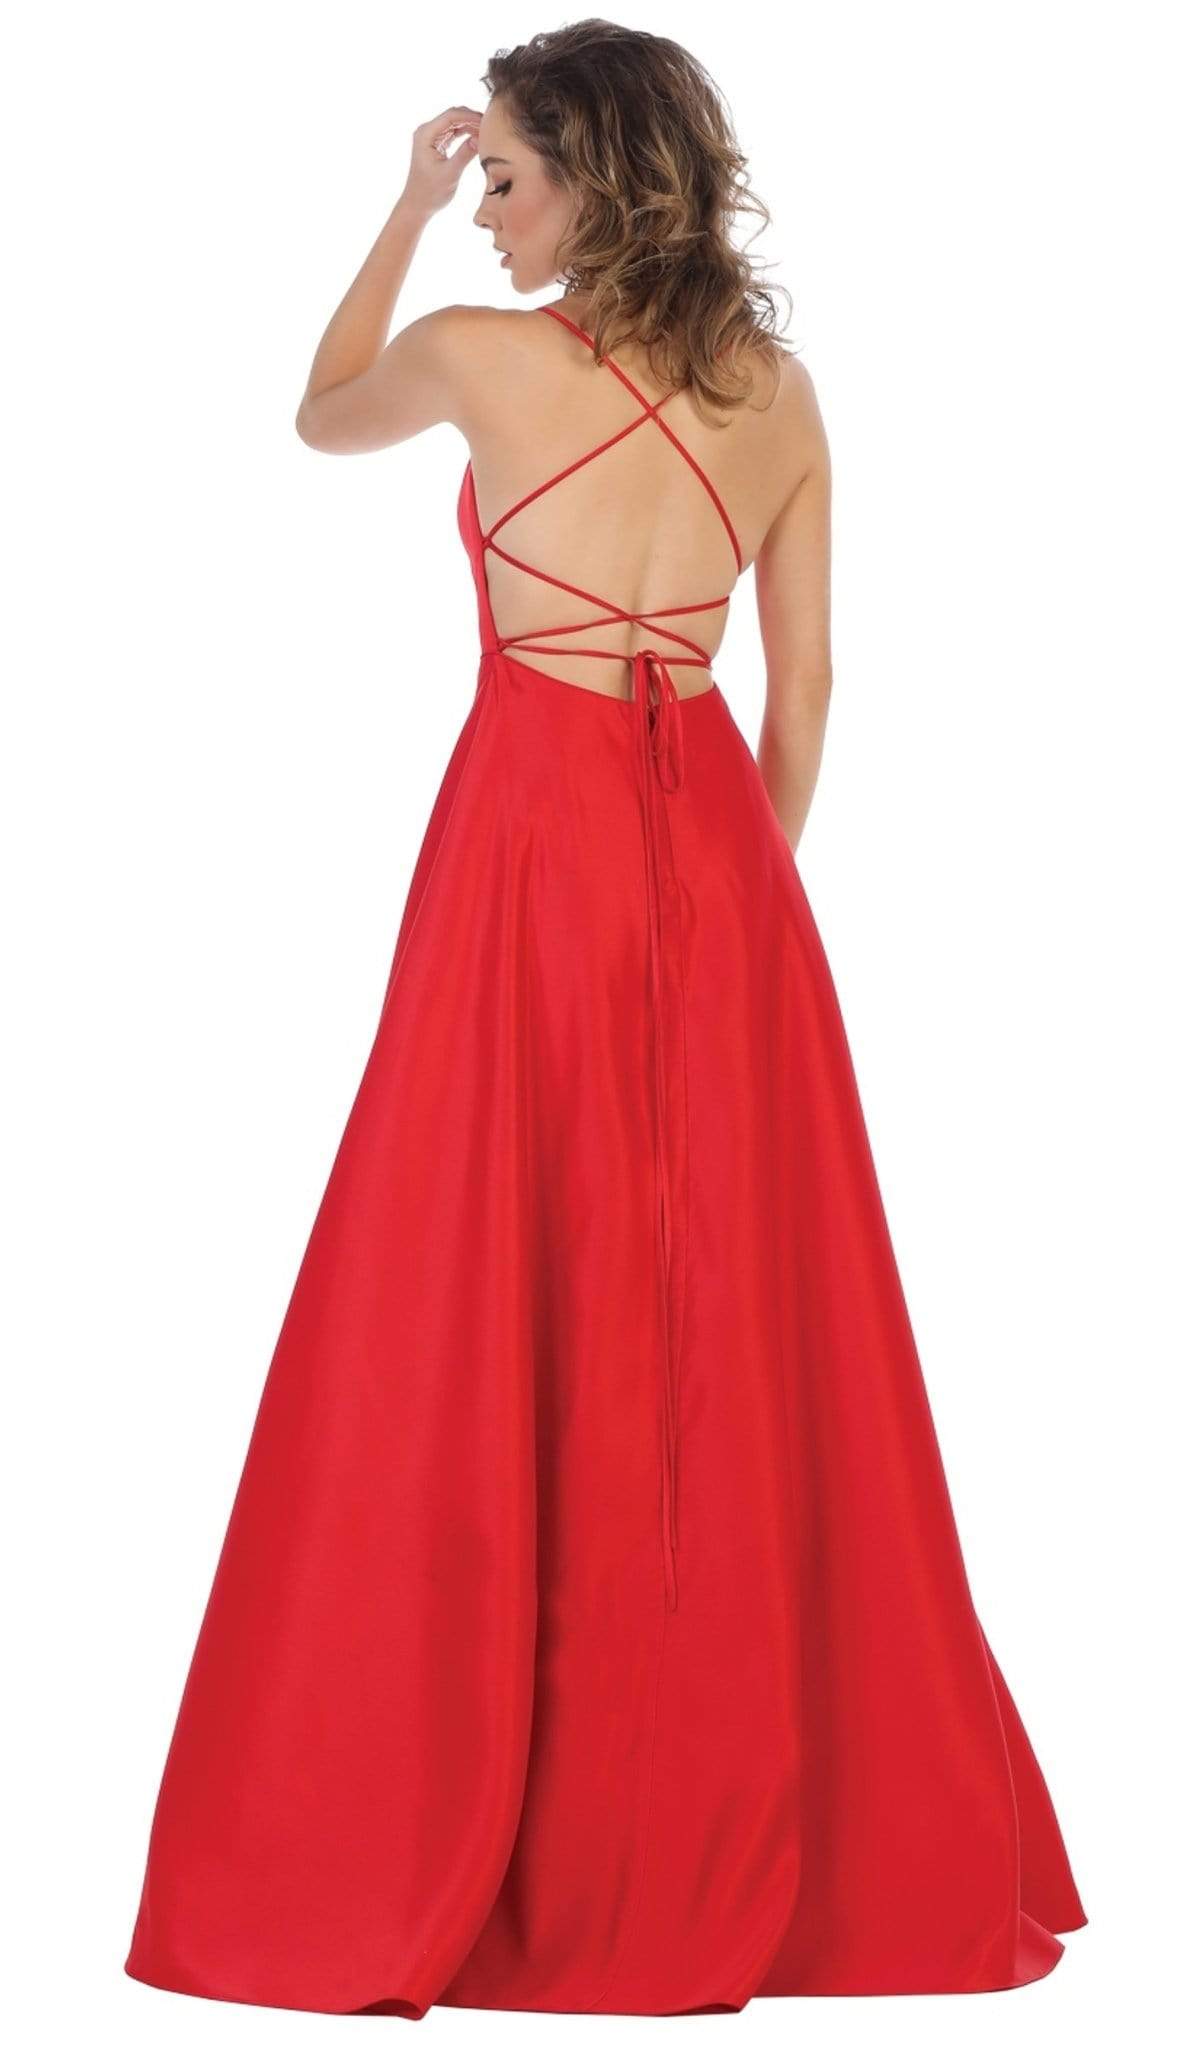 May Queen - RQ7711 Sleeveless Square Neck Tie String Back Satin Gown Bridesmaid Dresses